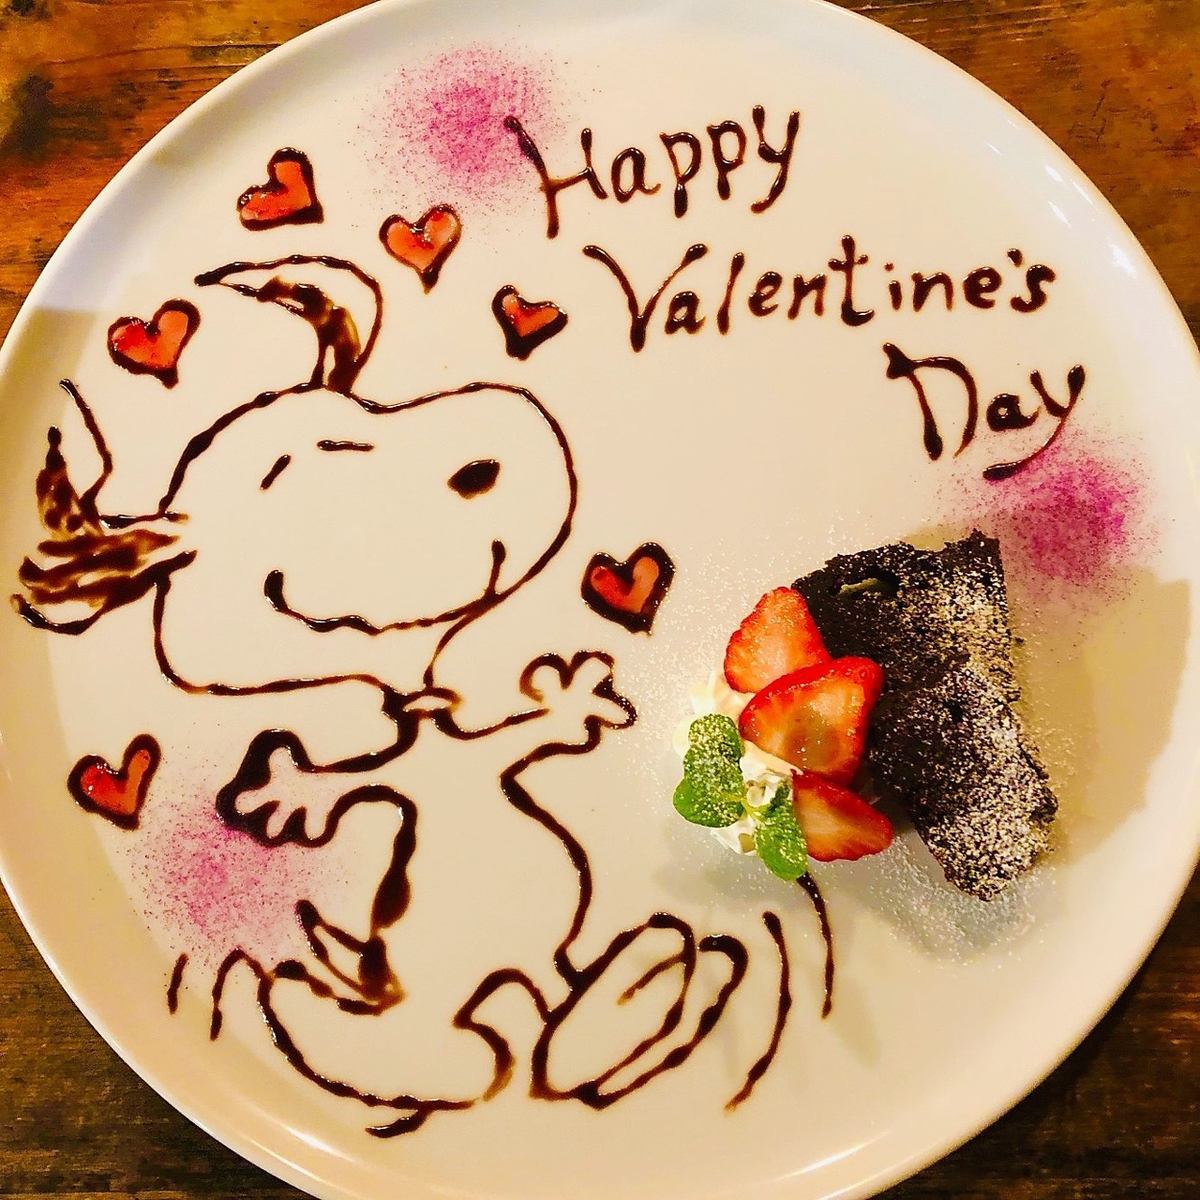 Celebrate with character design plate & colorful whole cake ♪